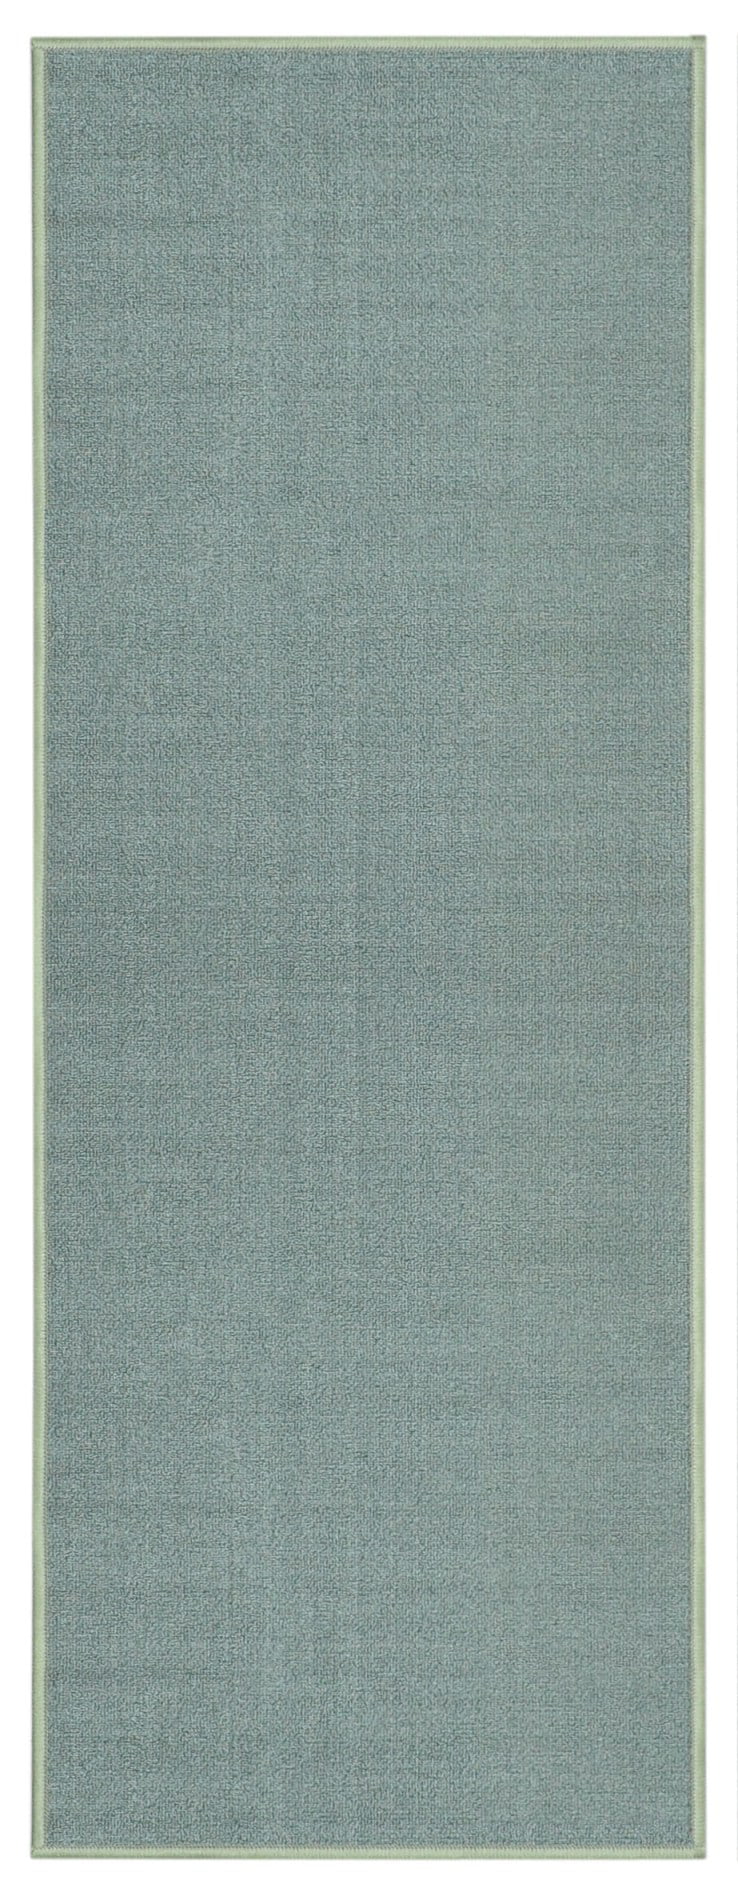 Premium Quality Custom Size Solid color Sage Green Runner Rug Non Skid 26" Width 